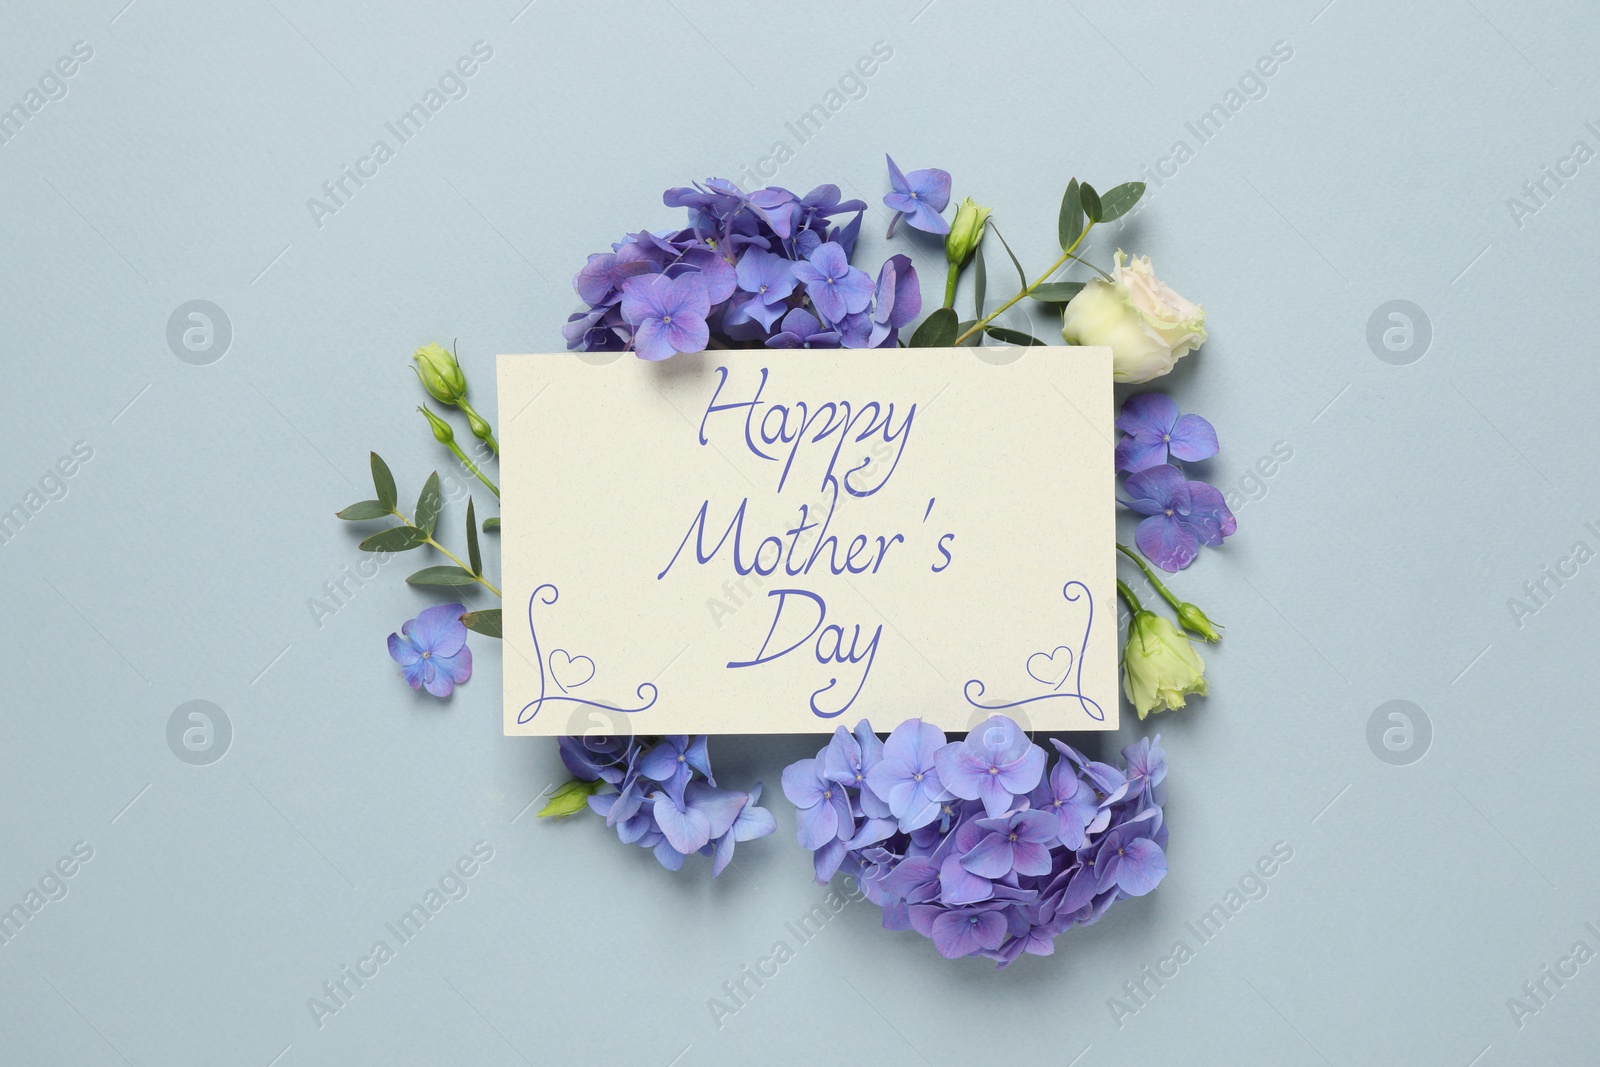 Image of Happy Mother's Day greeting card and beautiful flowers on pale light blue background, flat lay